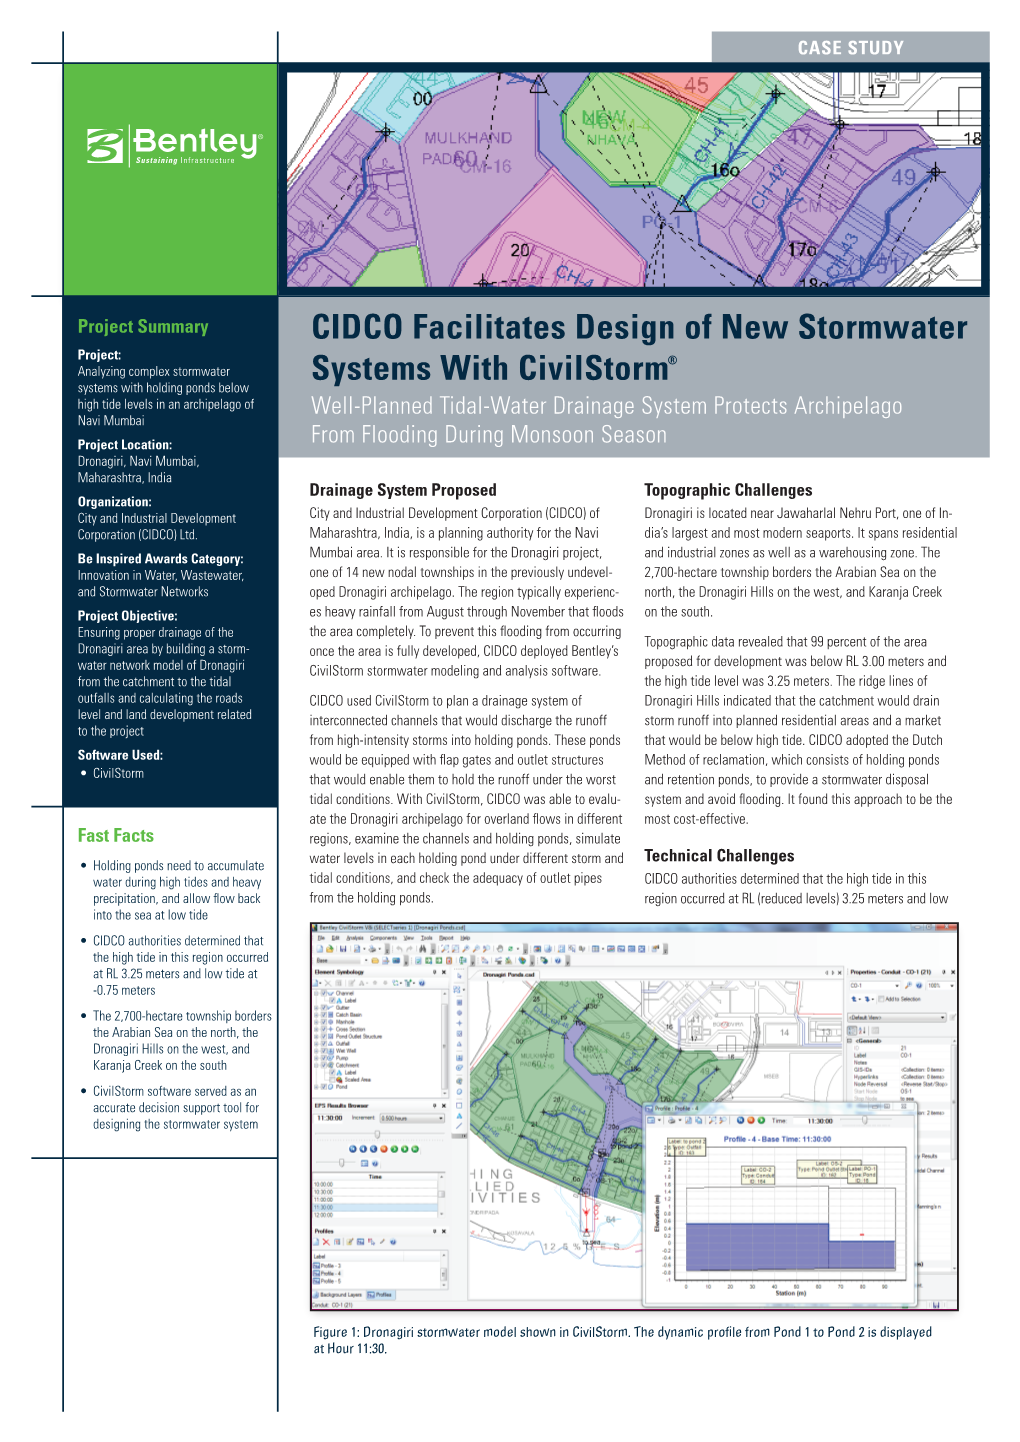 Cidco Facilitates Design of New Stormwater Systems with Civilstorm®